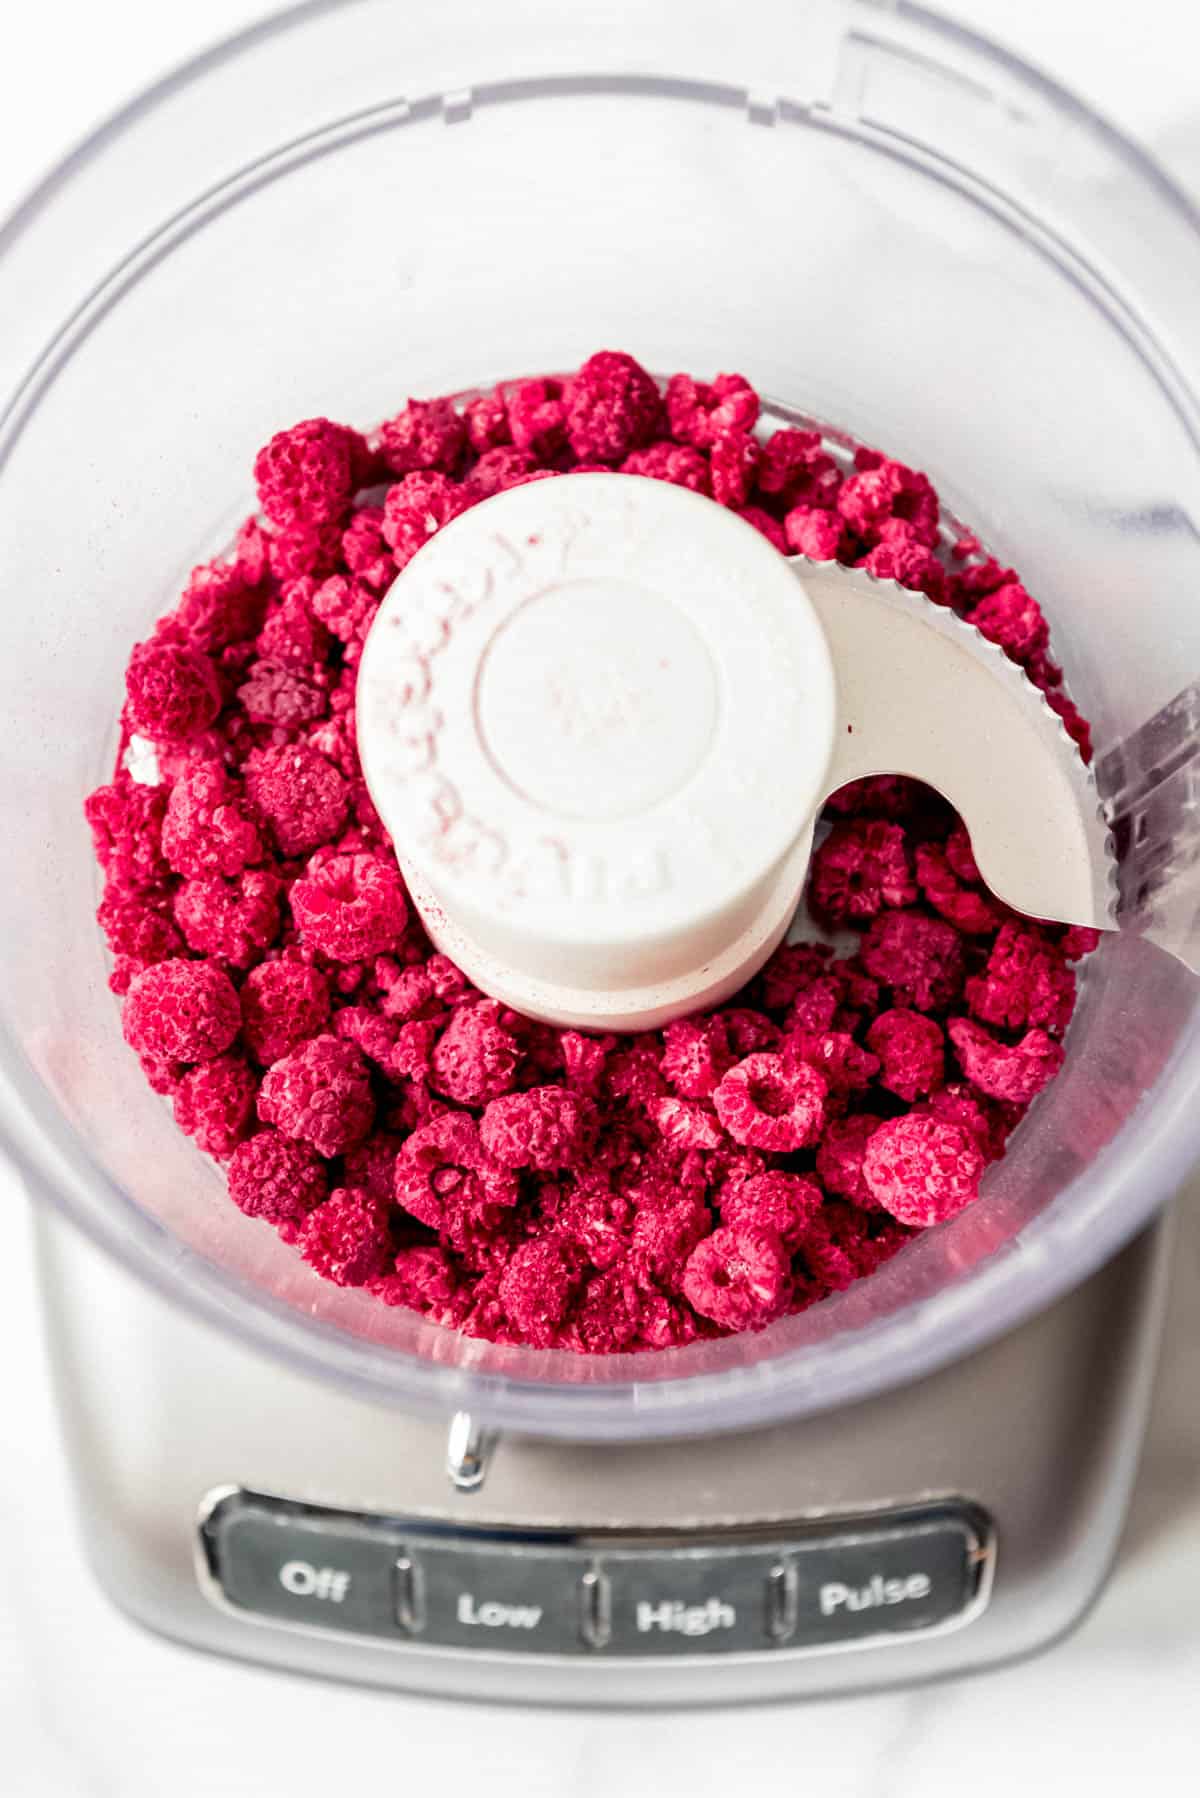 Freeze dried raspberries in food processor ready to be ground.